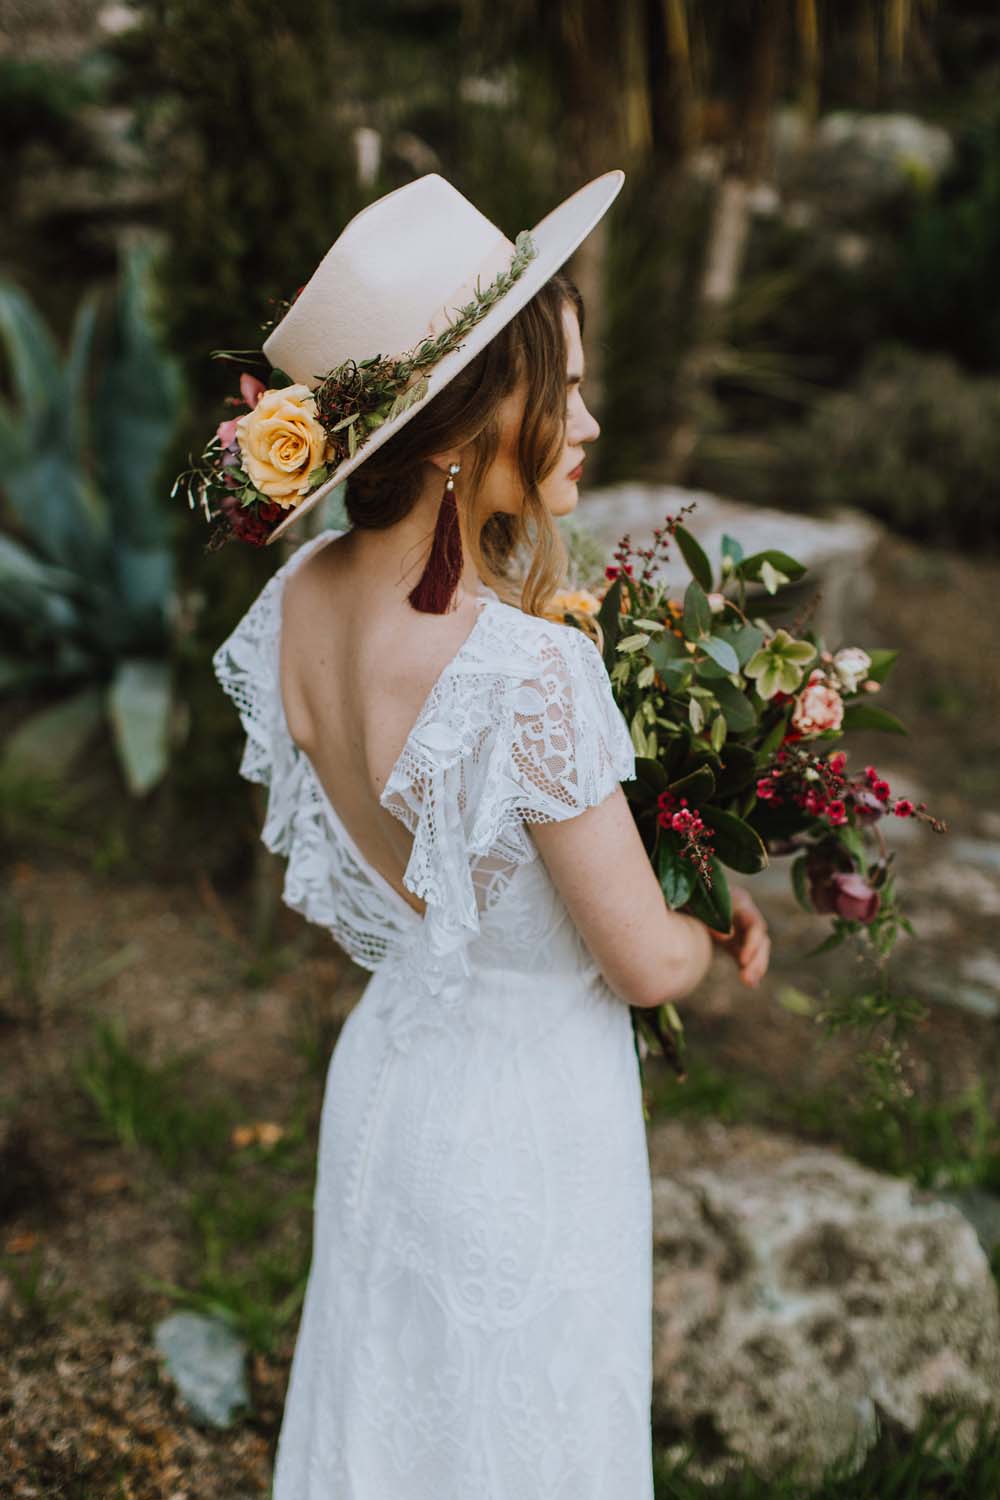 These Are The Details You Need For A Southwestern-Inspired Wedding - 